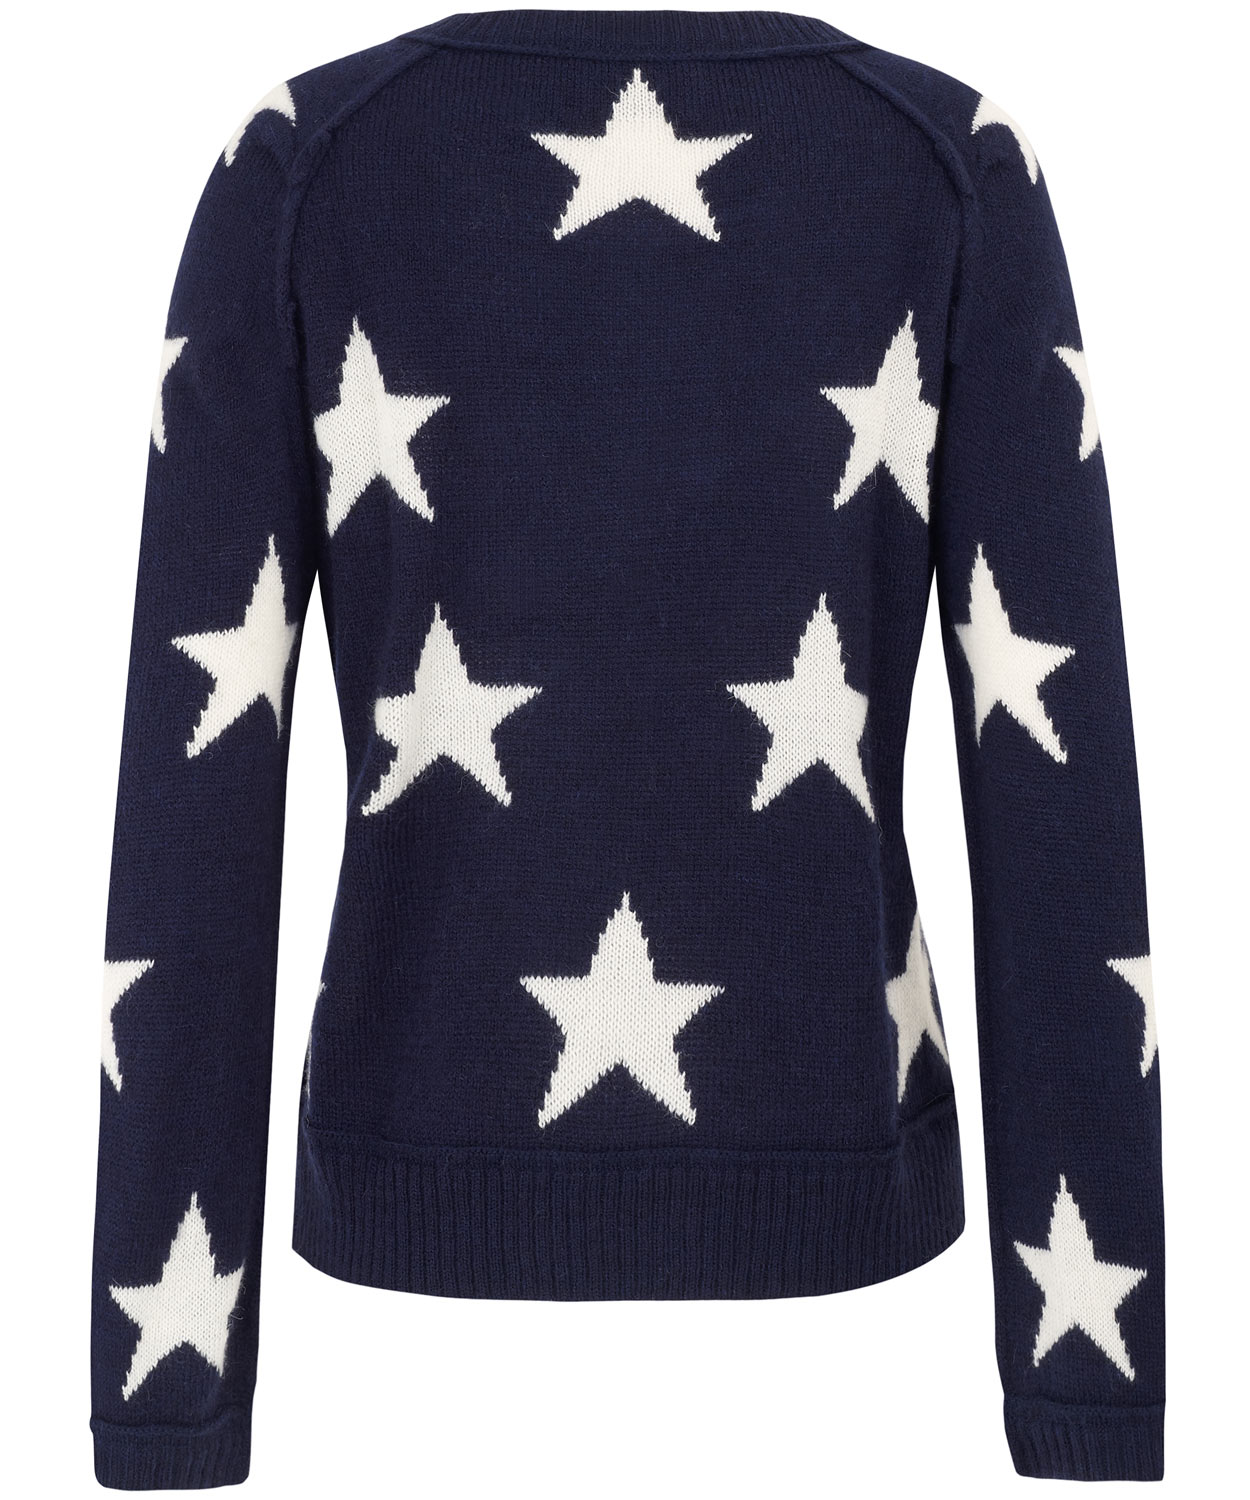 Sea Navy Star Knitted Jumper in Blue - Lyst